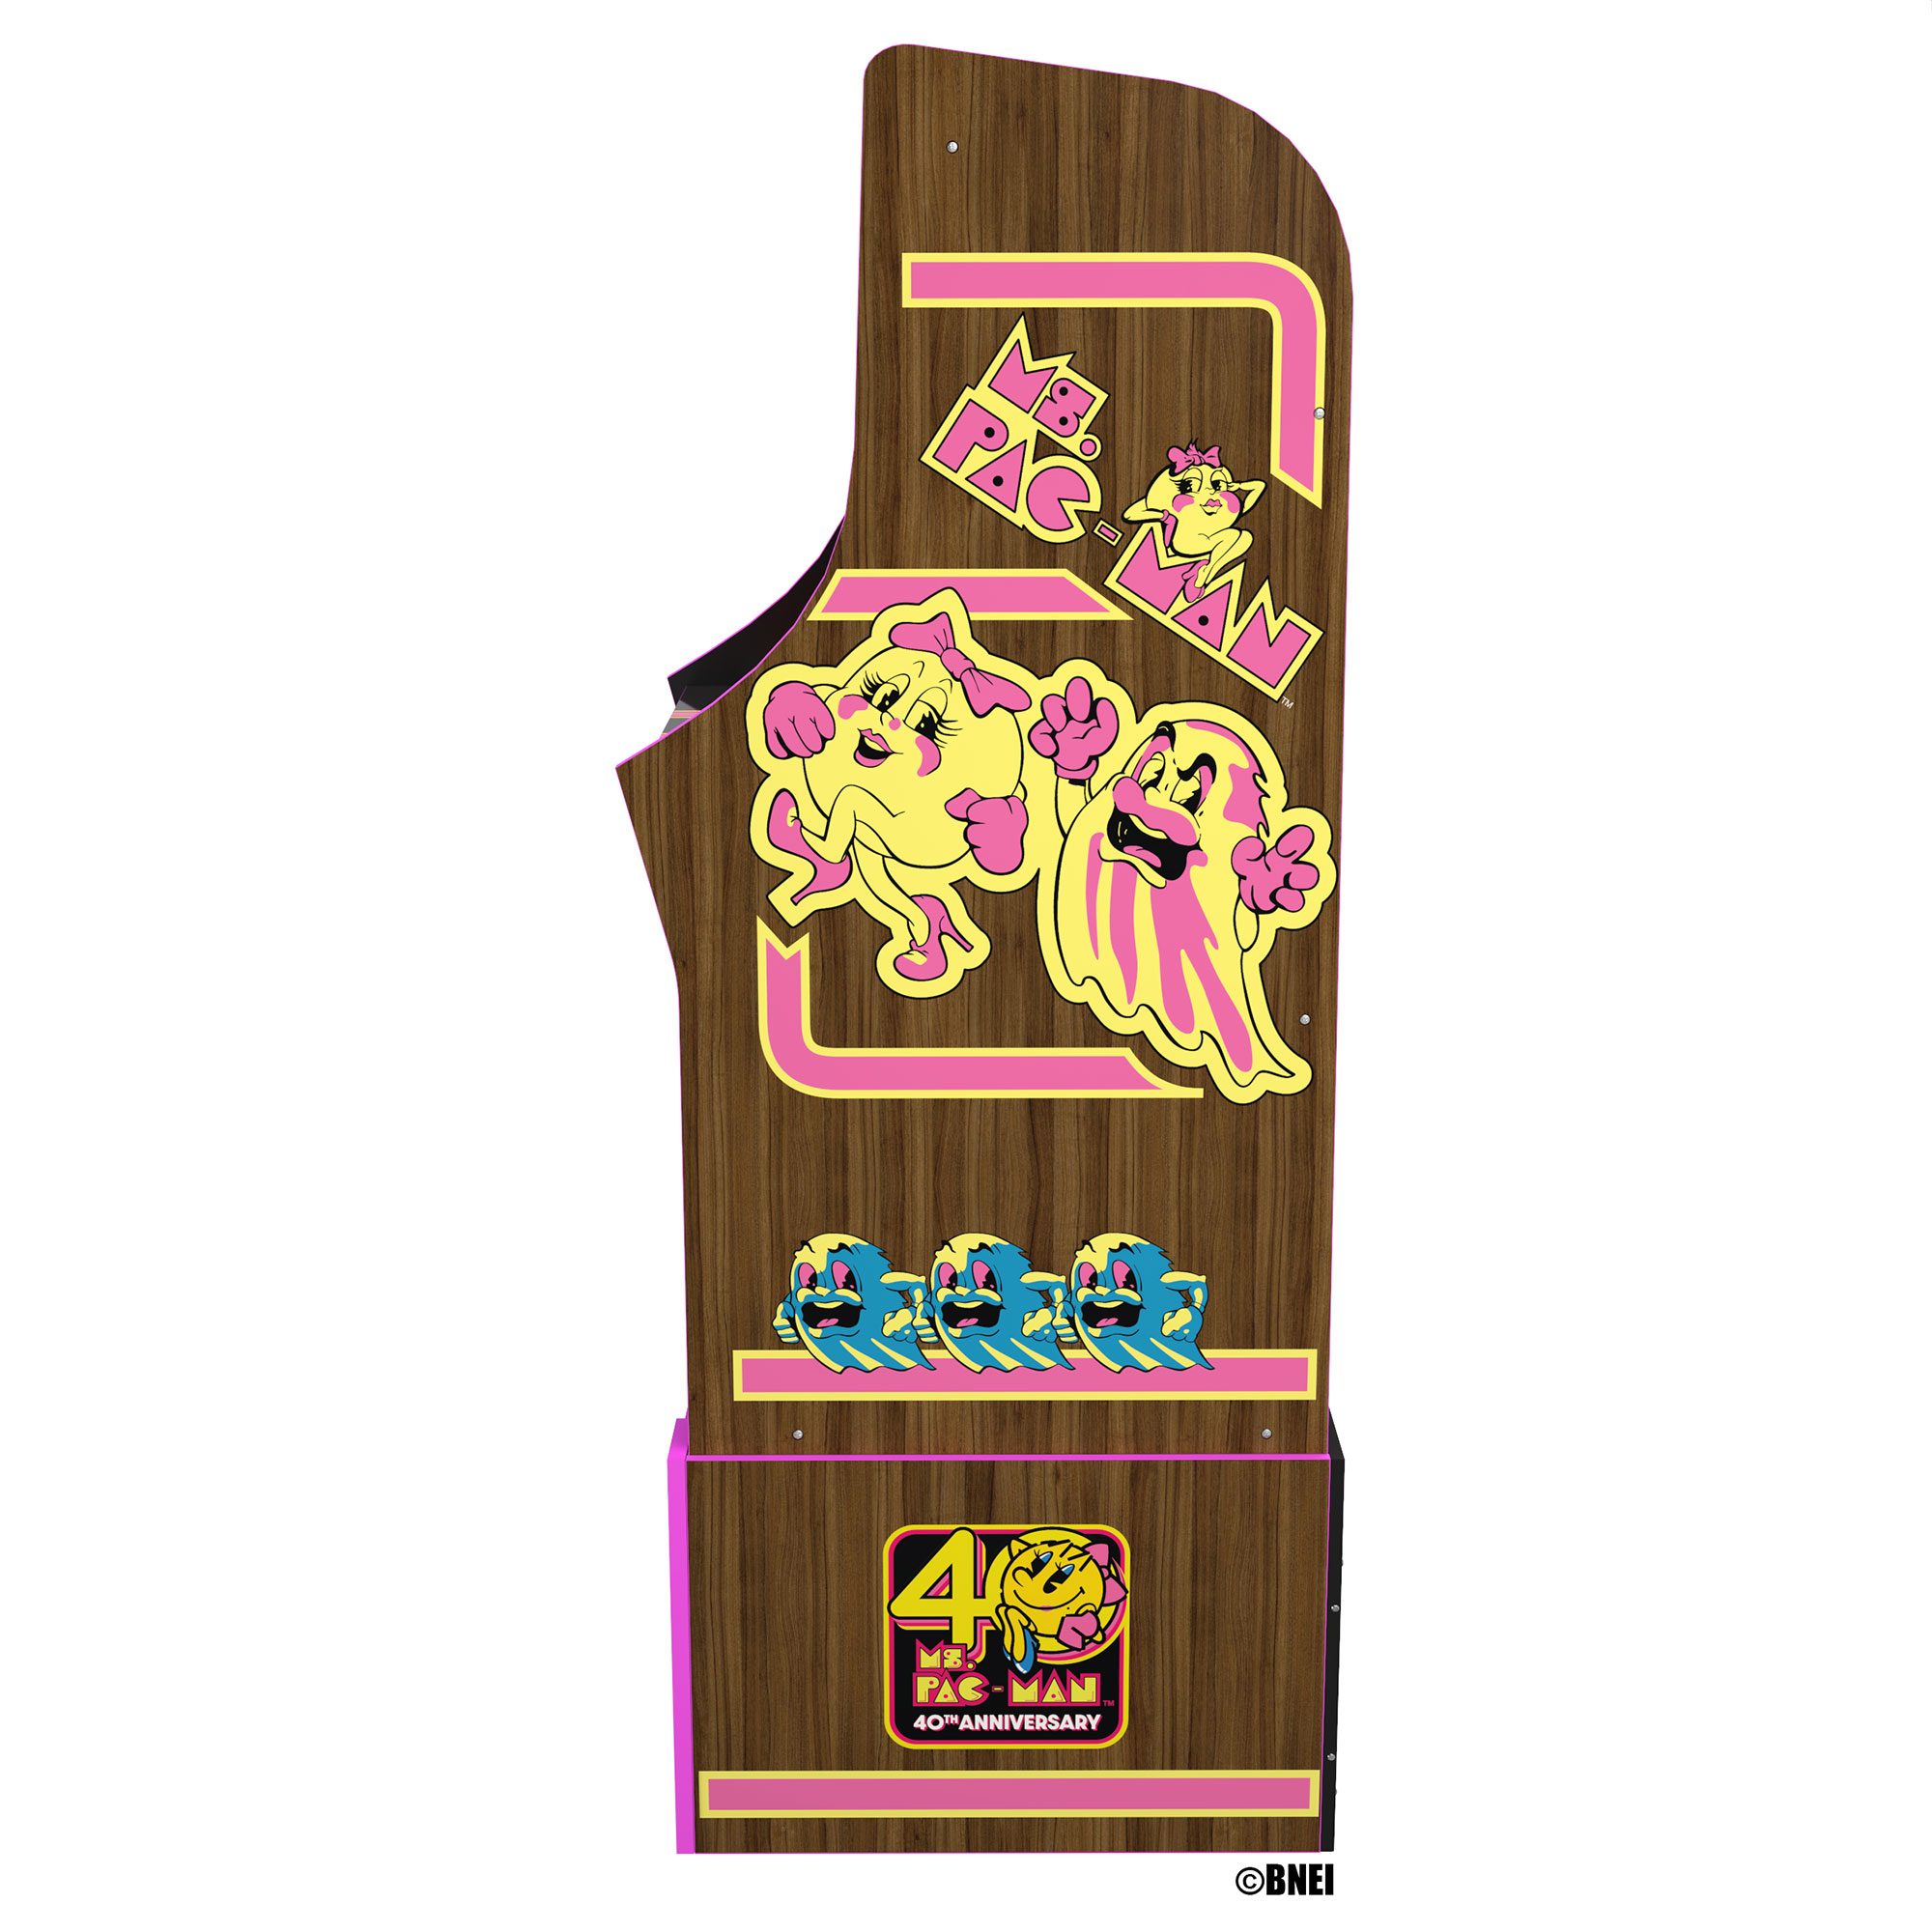 Arcade1Up Ms. Pac Man 40th Anniversary 10 In 1 Arcade Video Game Machine - image 4 of 8